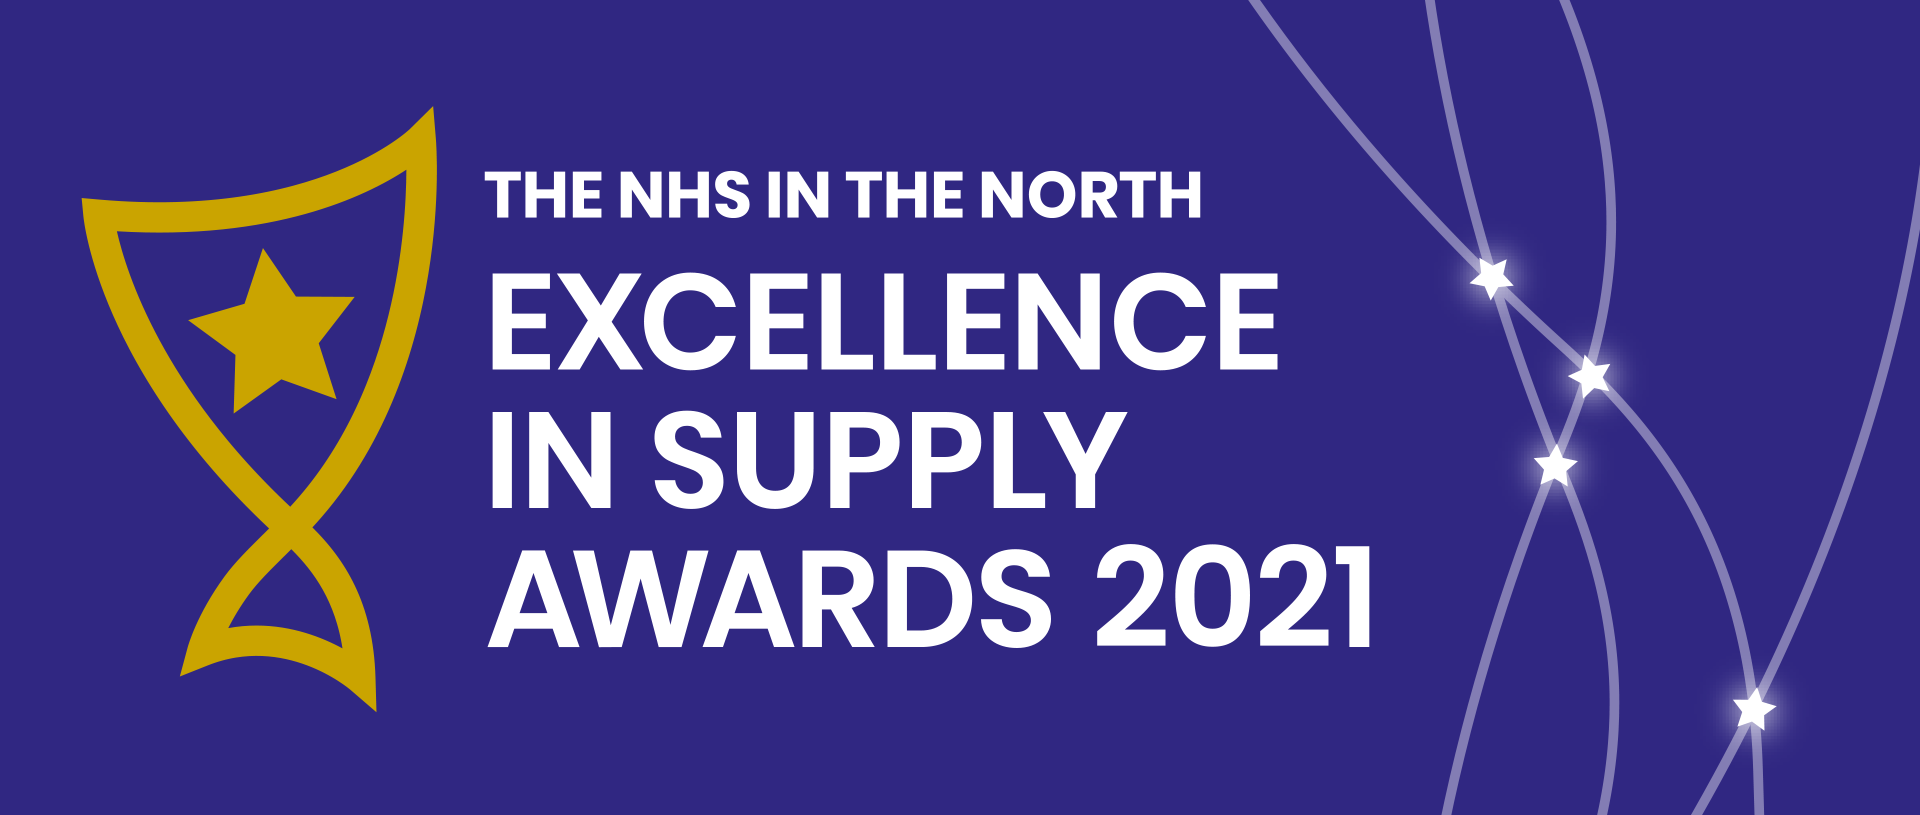 The NHS in the north Excellence in Supply Awards 2021